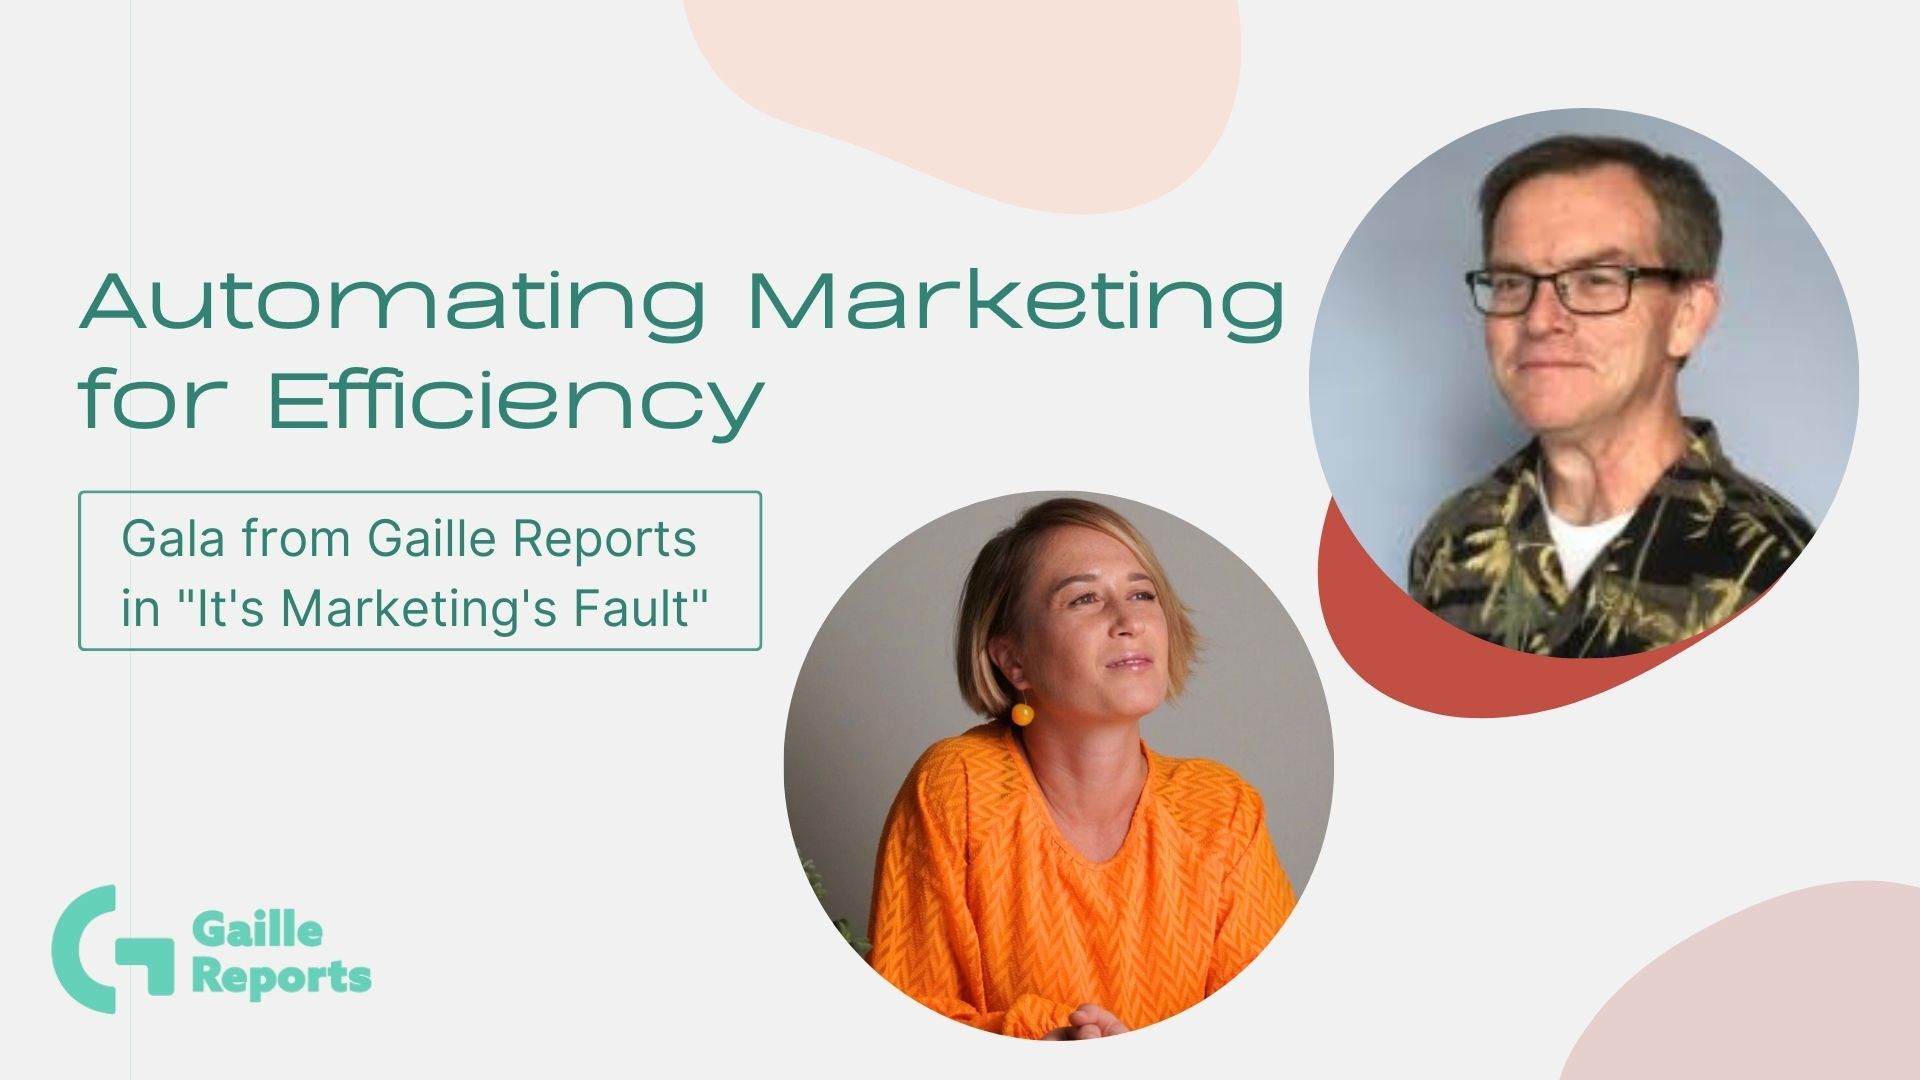 Podcast “It’s Marketing’s Fault” with Gala from Gaille Reports